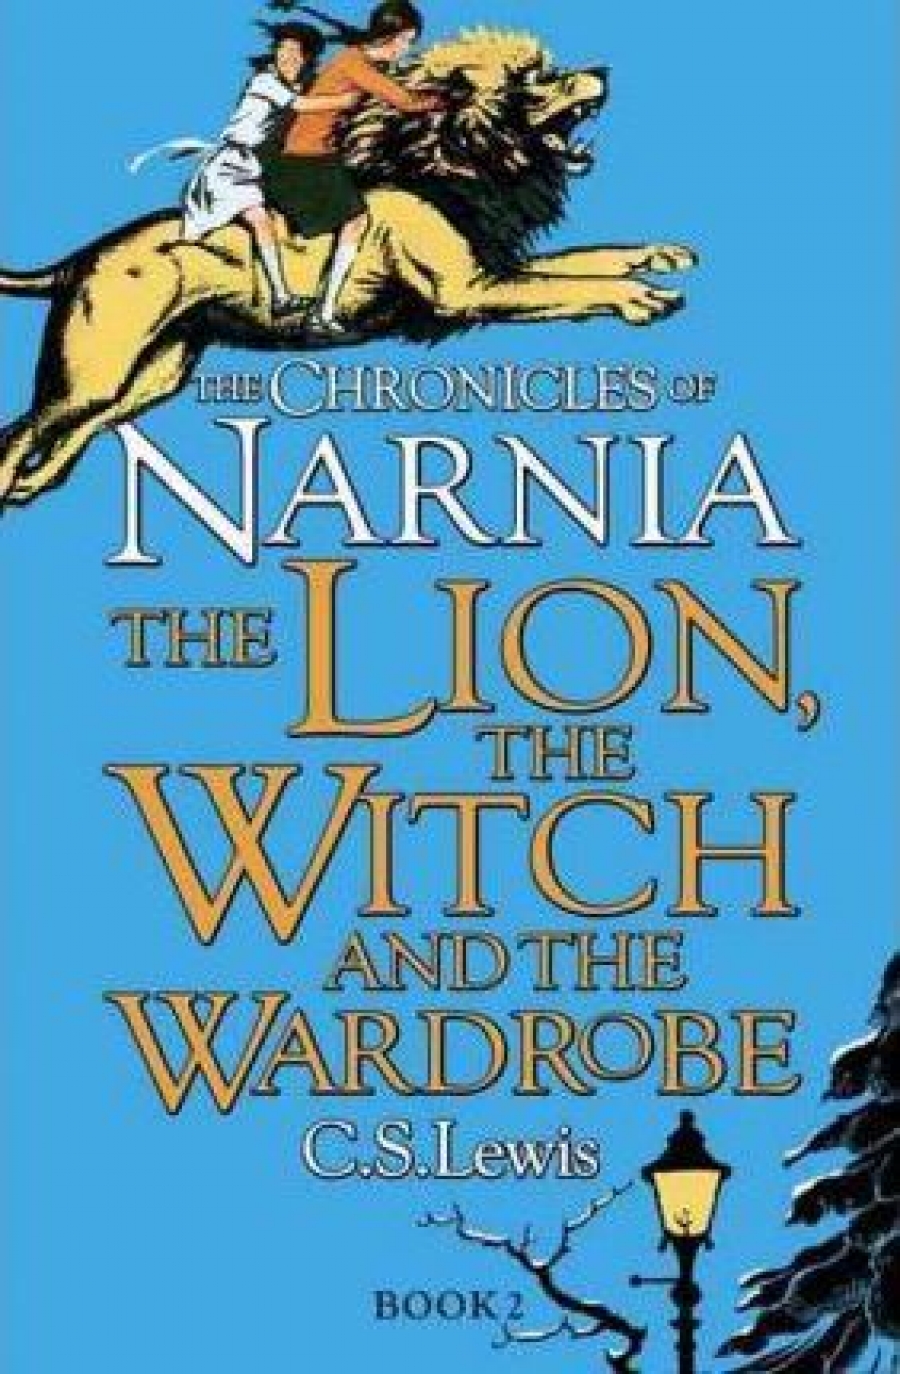 Lewis C. S. Lewis C. S. The Chronicles of Narnia 2. The Lion, the Witch and the Wardrobe 